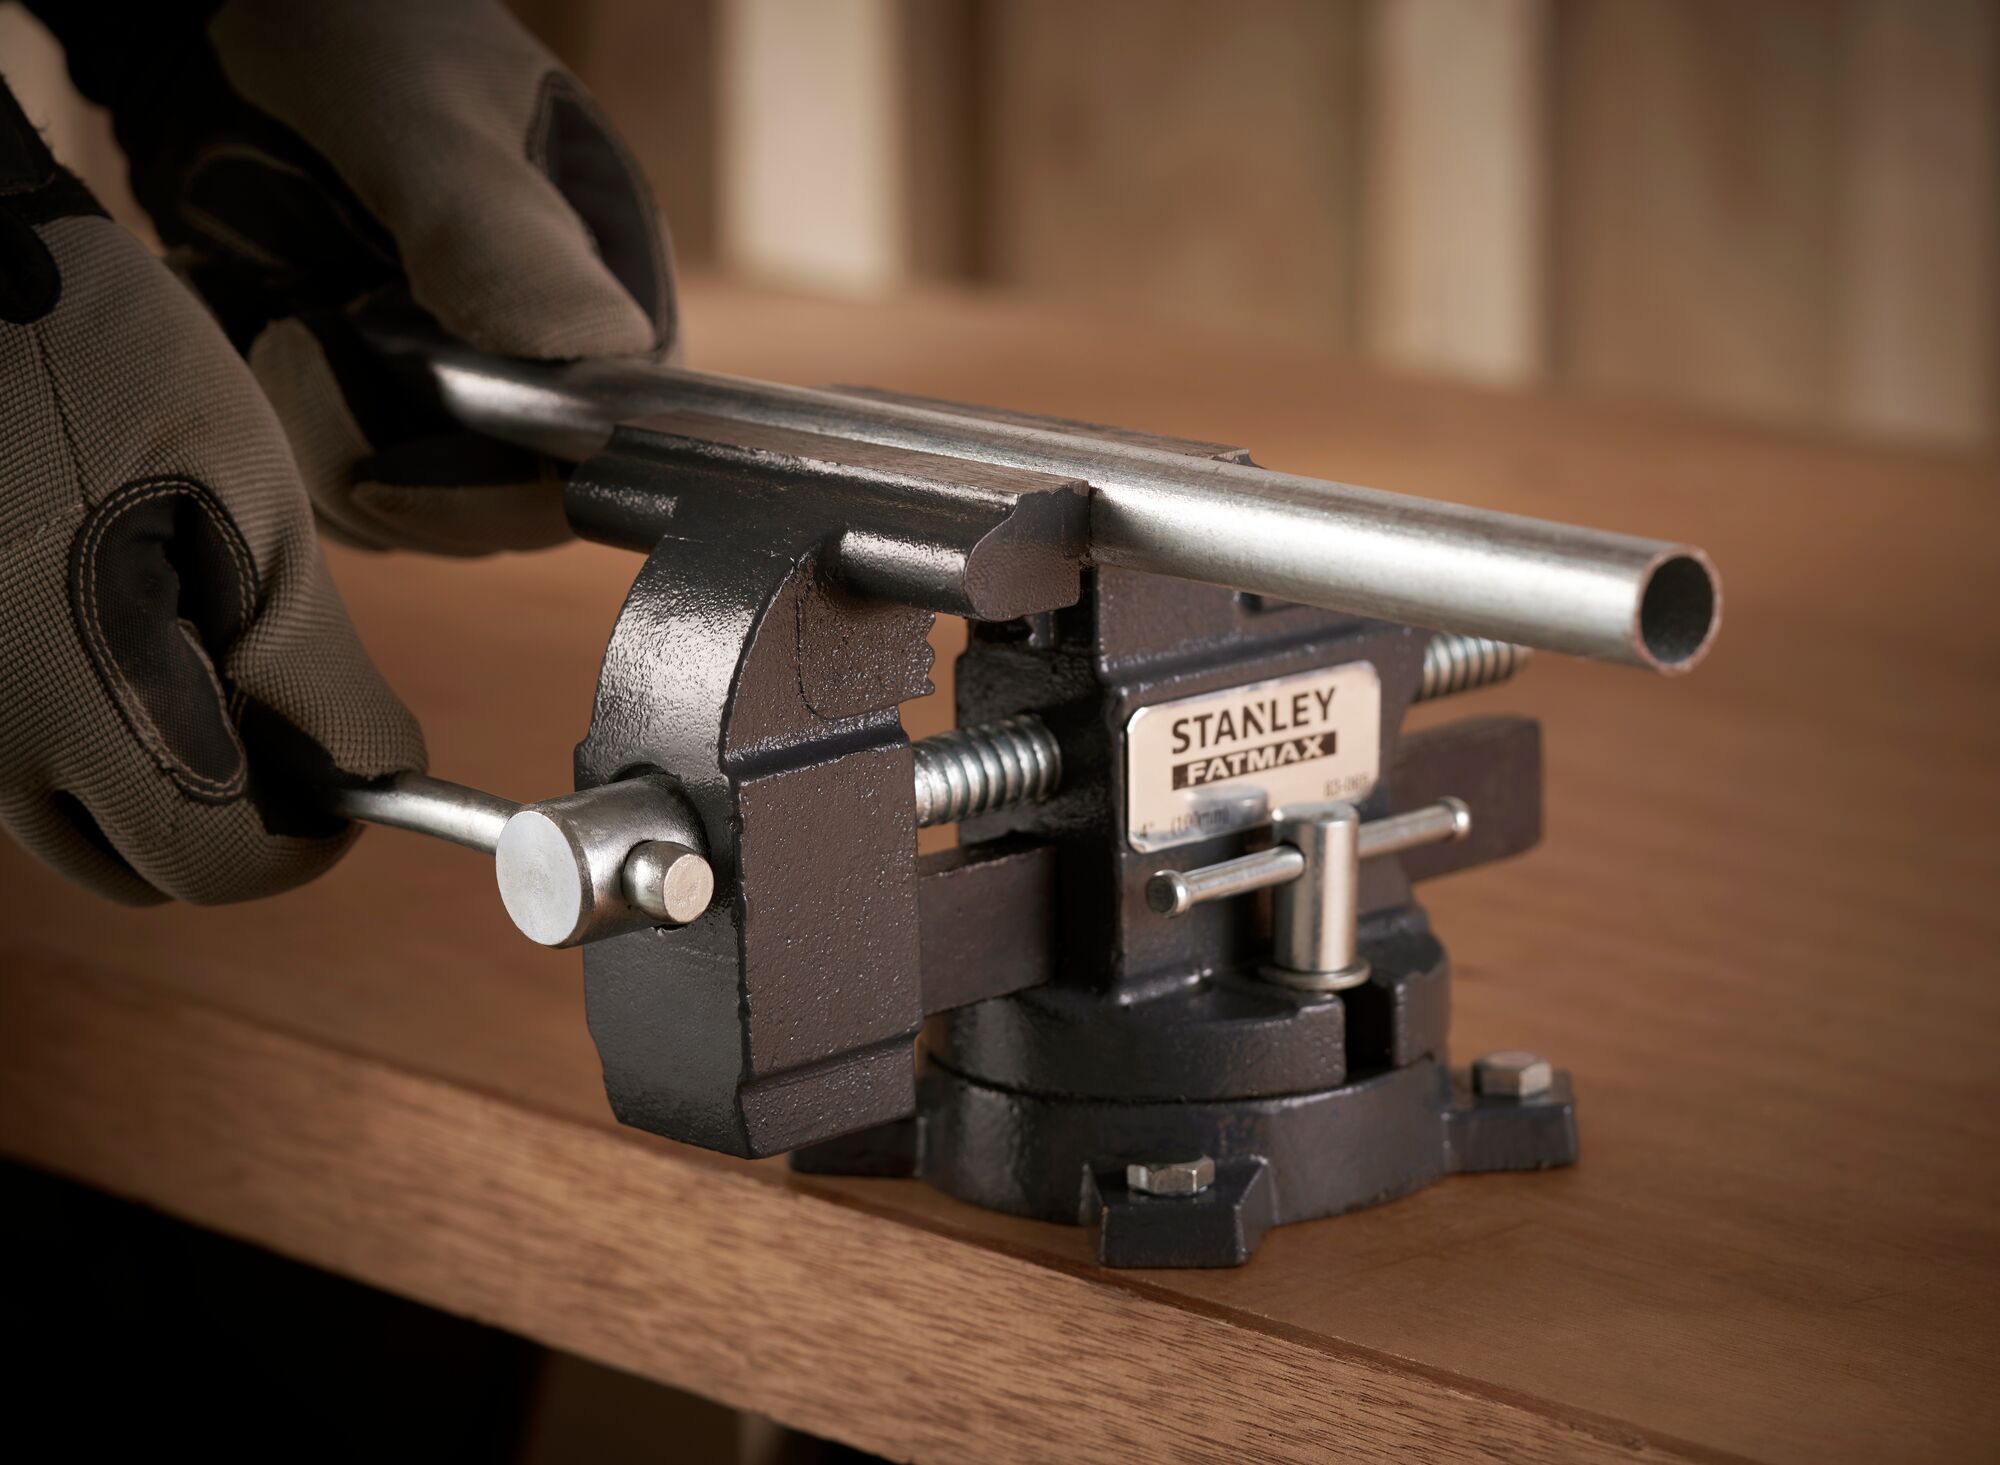 Stanley 100Mm/4" Light Duty Vice Side View